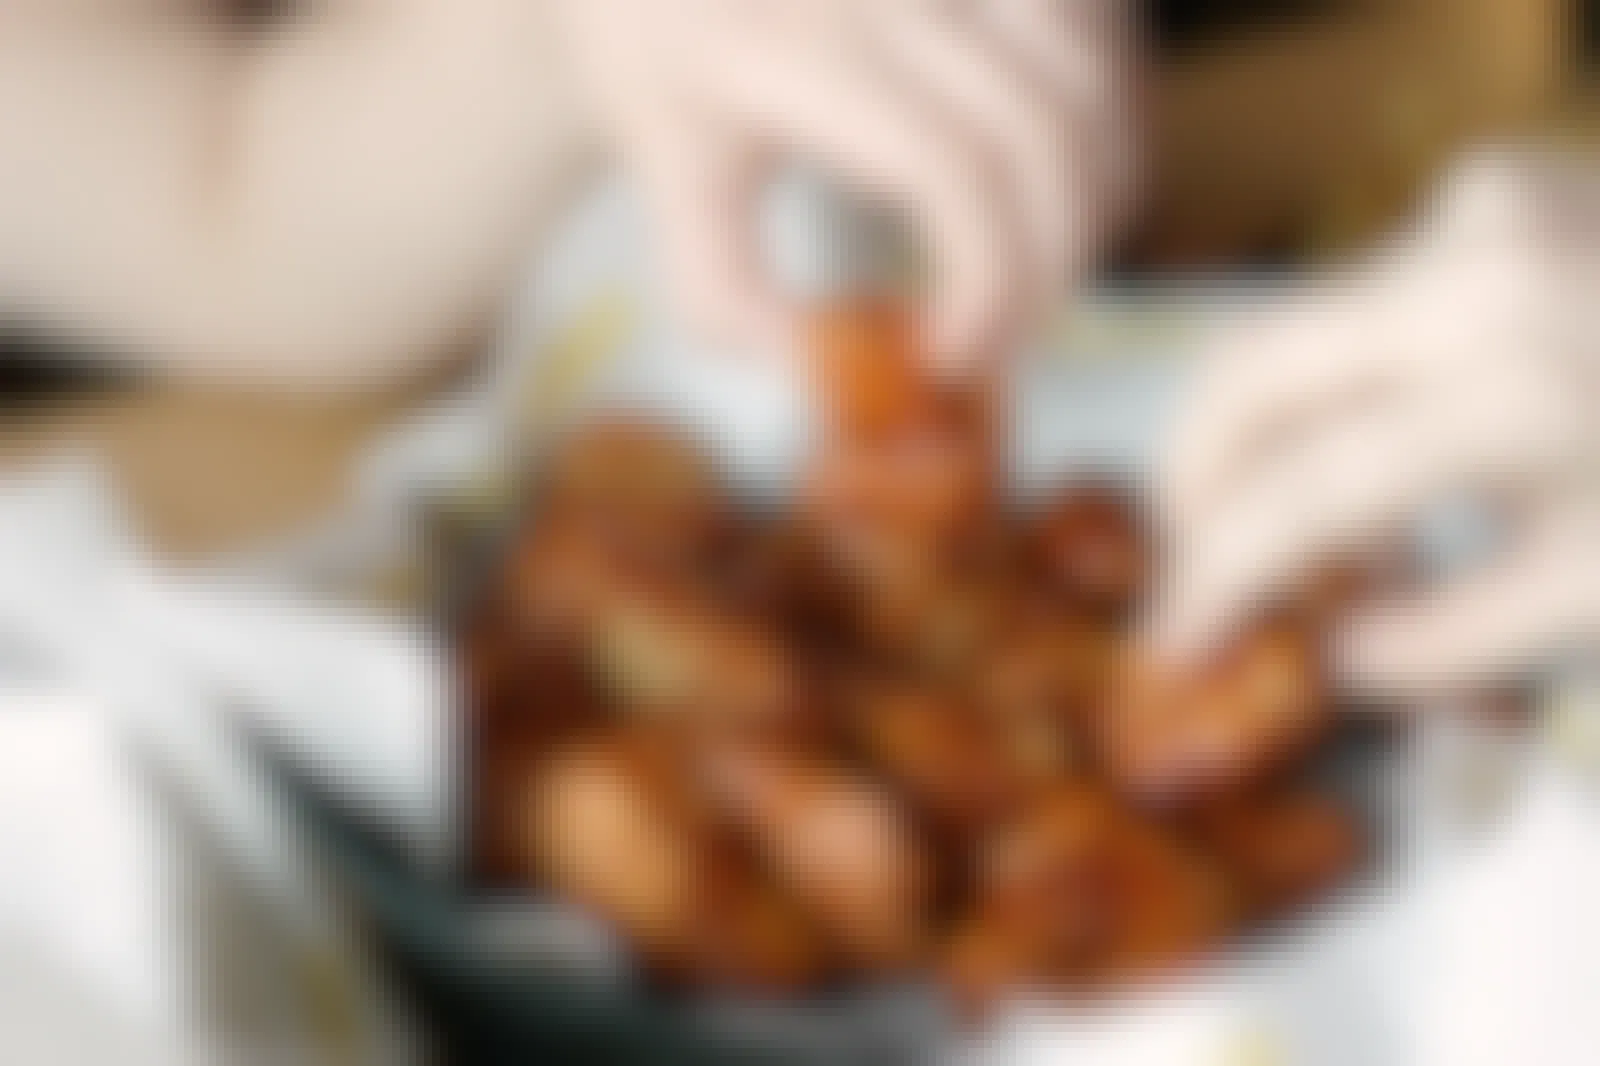 A basket of Buffalo Wild Wings boneless wings sitting on a table with two people reaching in to each take a wing.